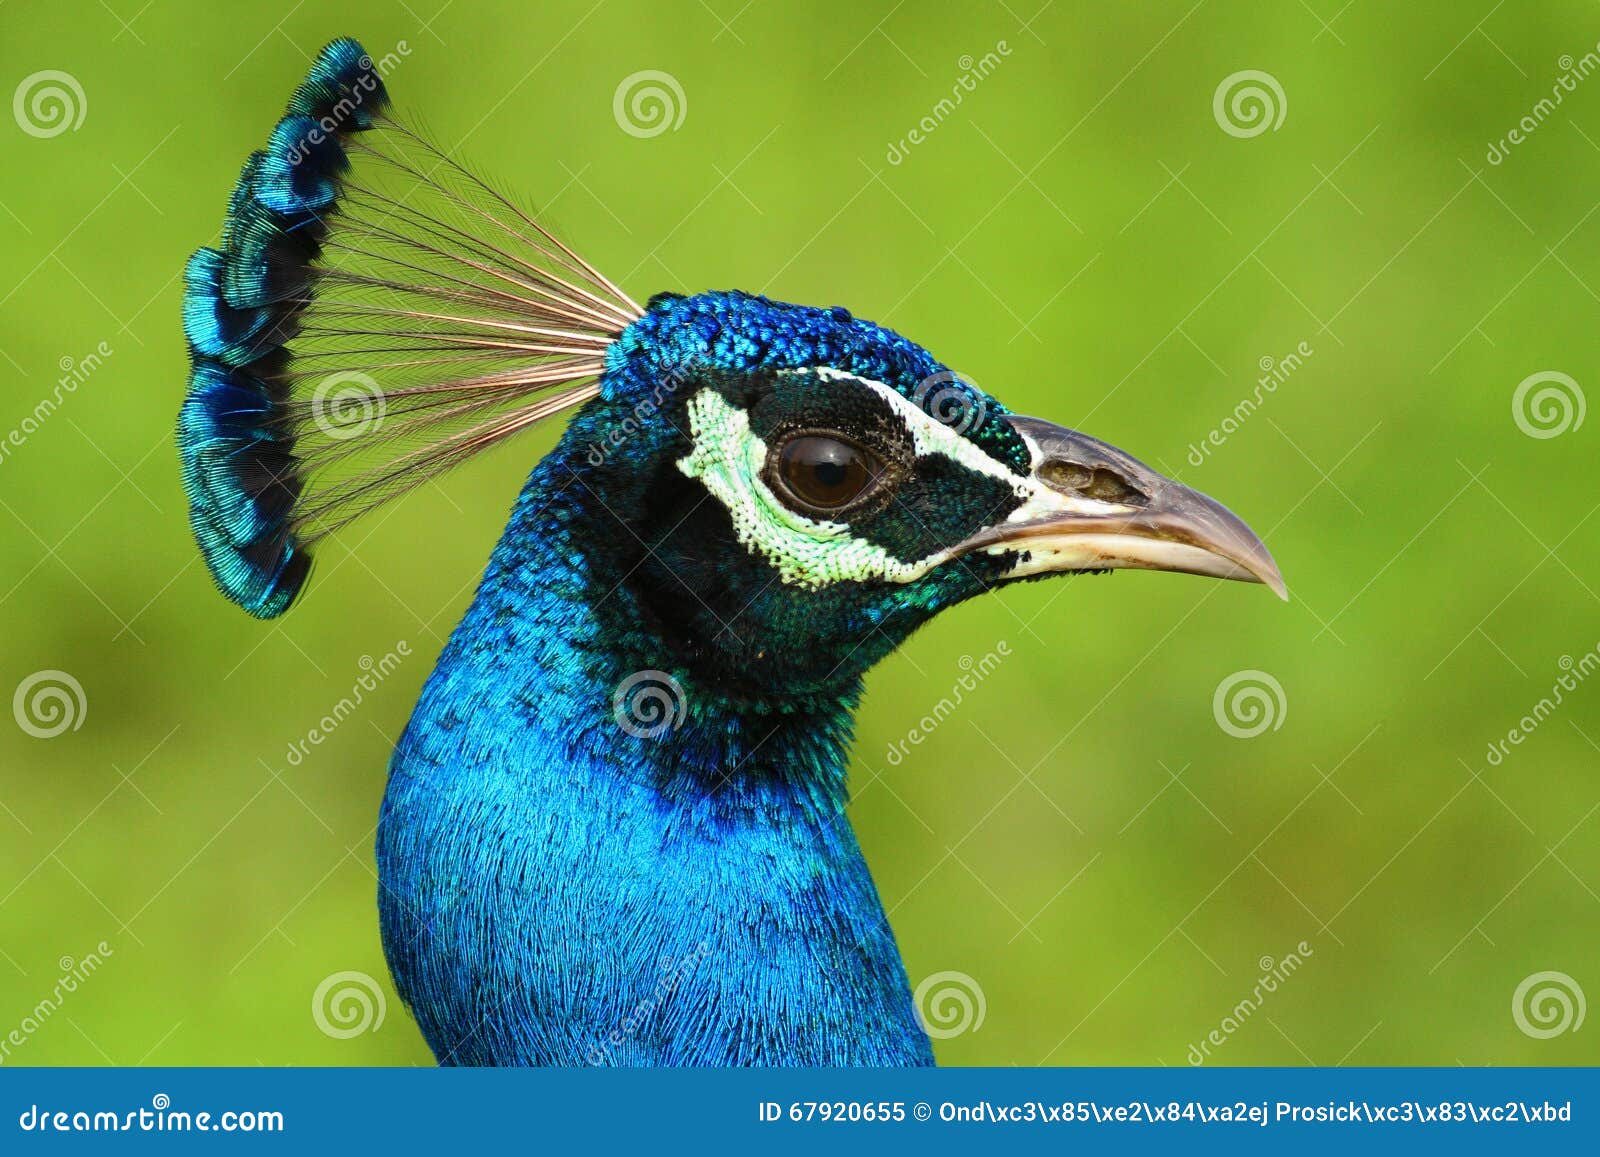 indian peafowl, pavo cristatus, detail head portrait, blue and green exotic bird from india and sri lanca